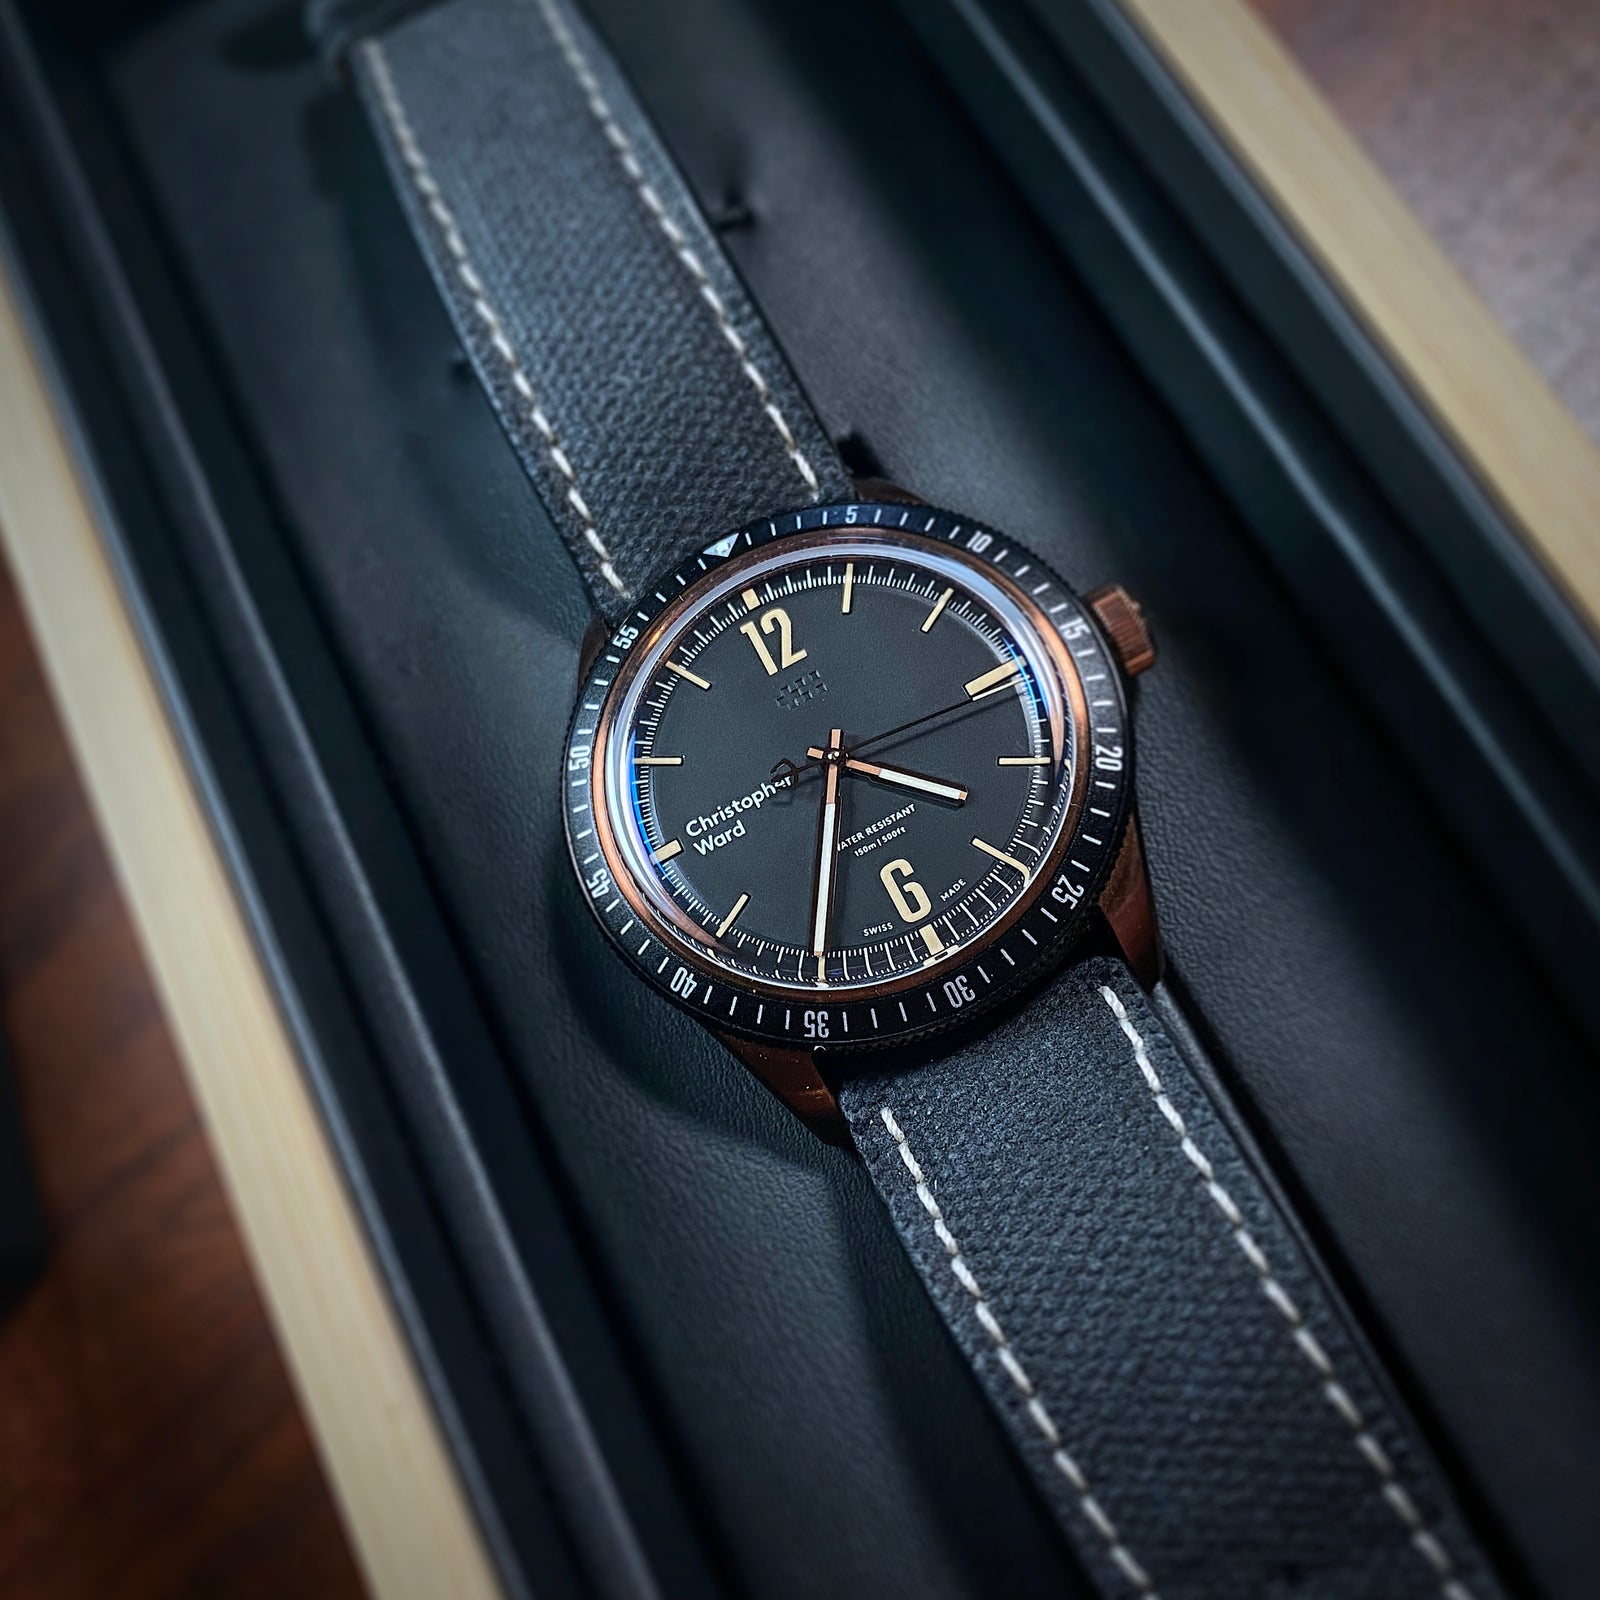 Christopher Ward - C65 Trident (Black Gold) Limited Edition